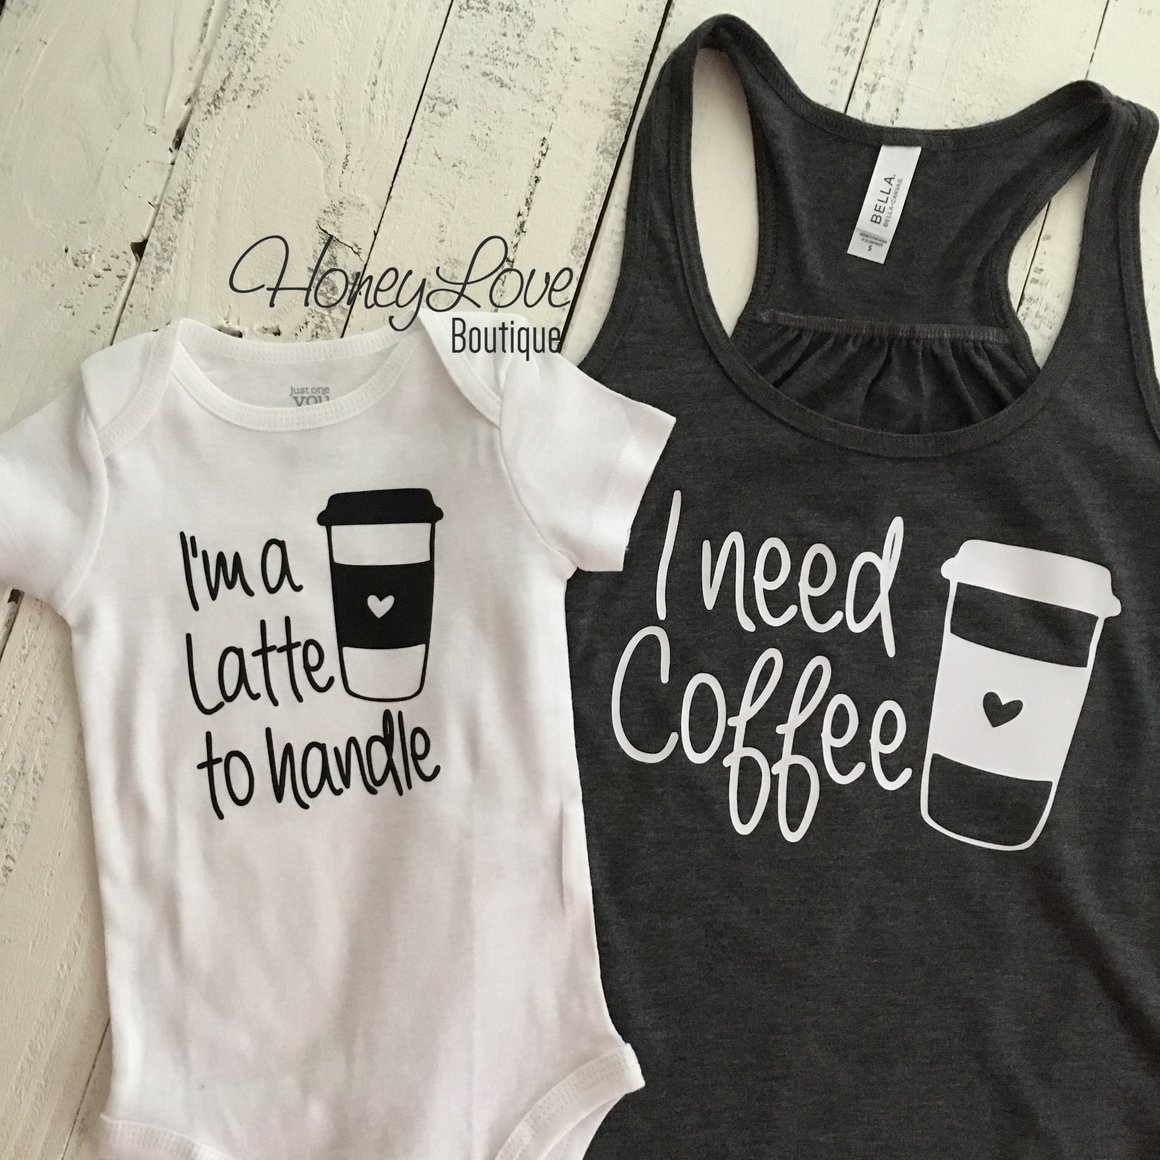 I need Coffee tank and I'm a Latte to handle bodysuit SET - HoneyLoveBoutique